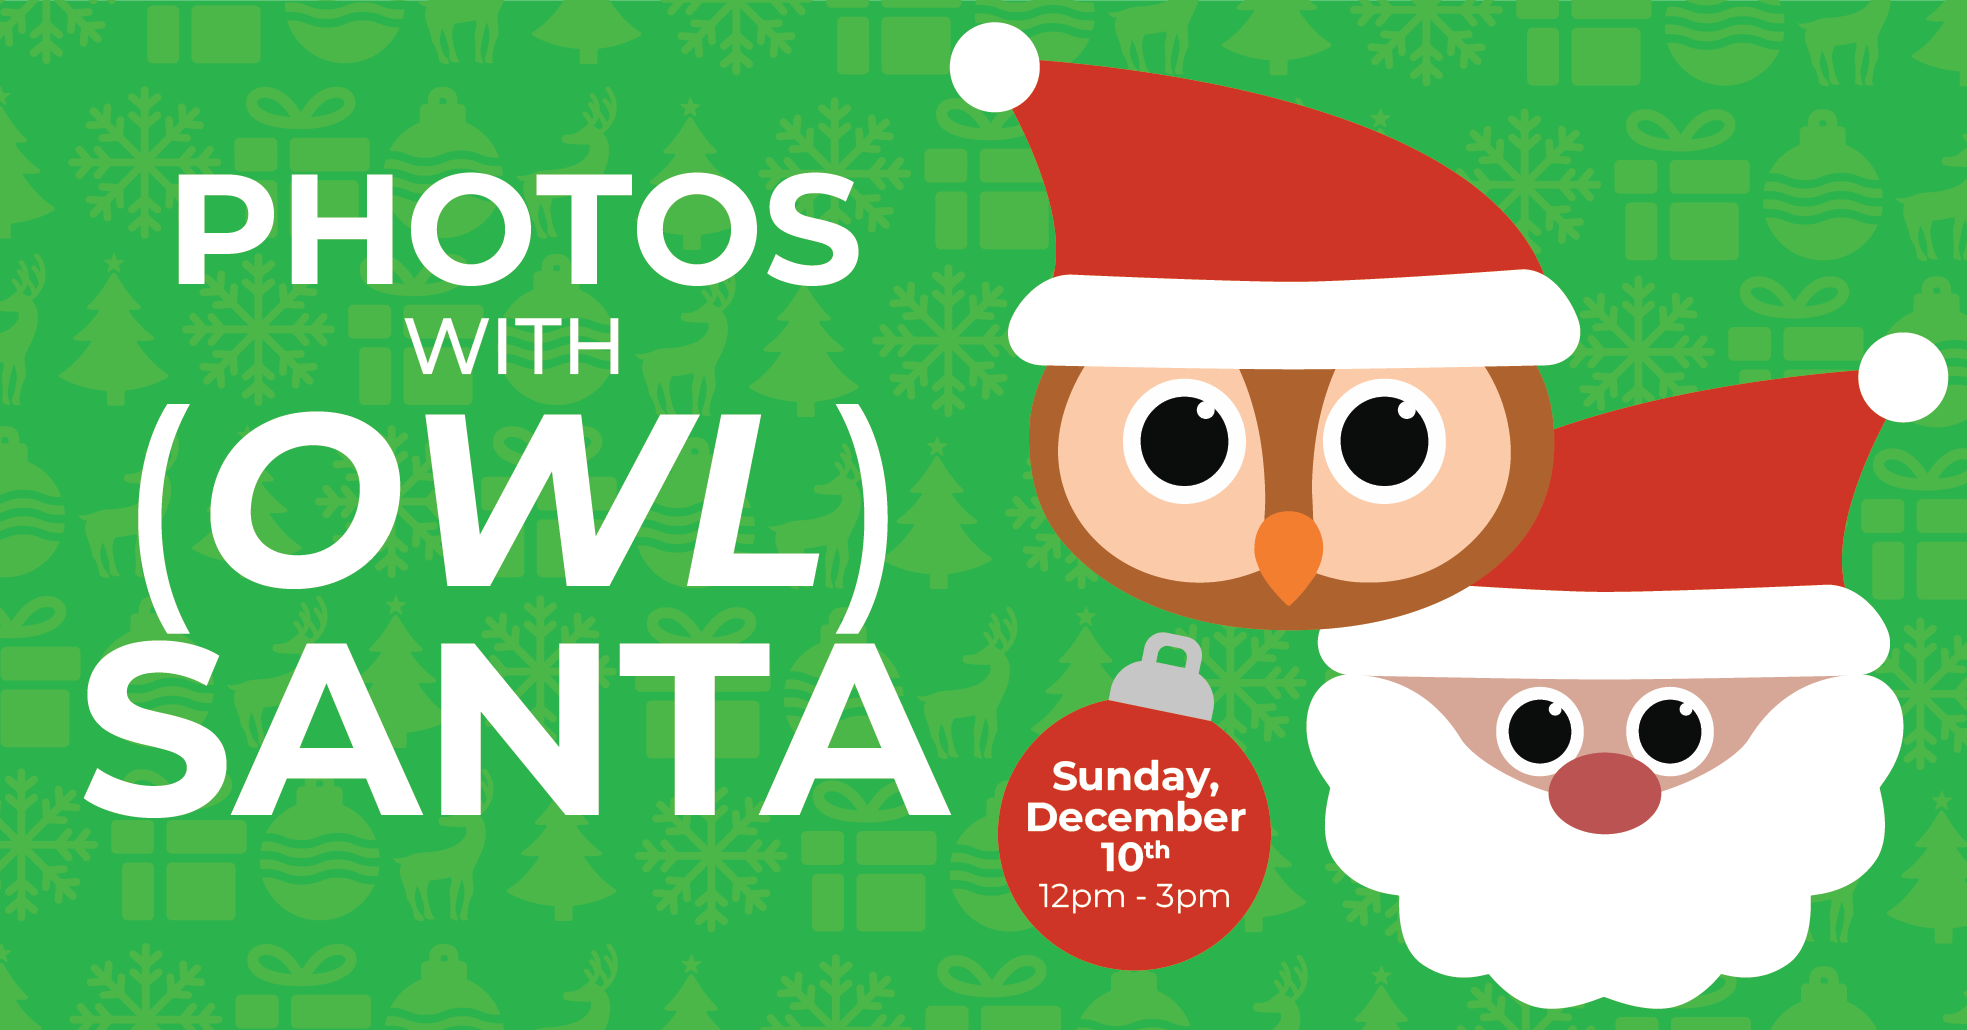 Graphic with text "Photos with (Owl) Santa" and cartoon images of Santa Claus and an owl in a Santa hat/